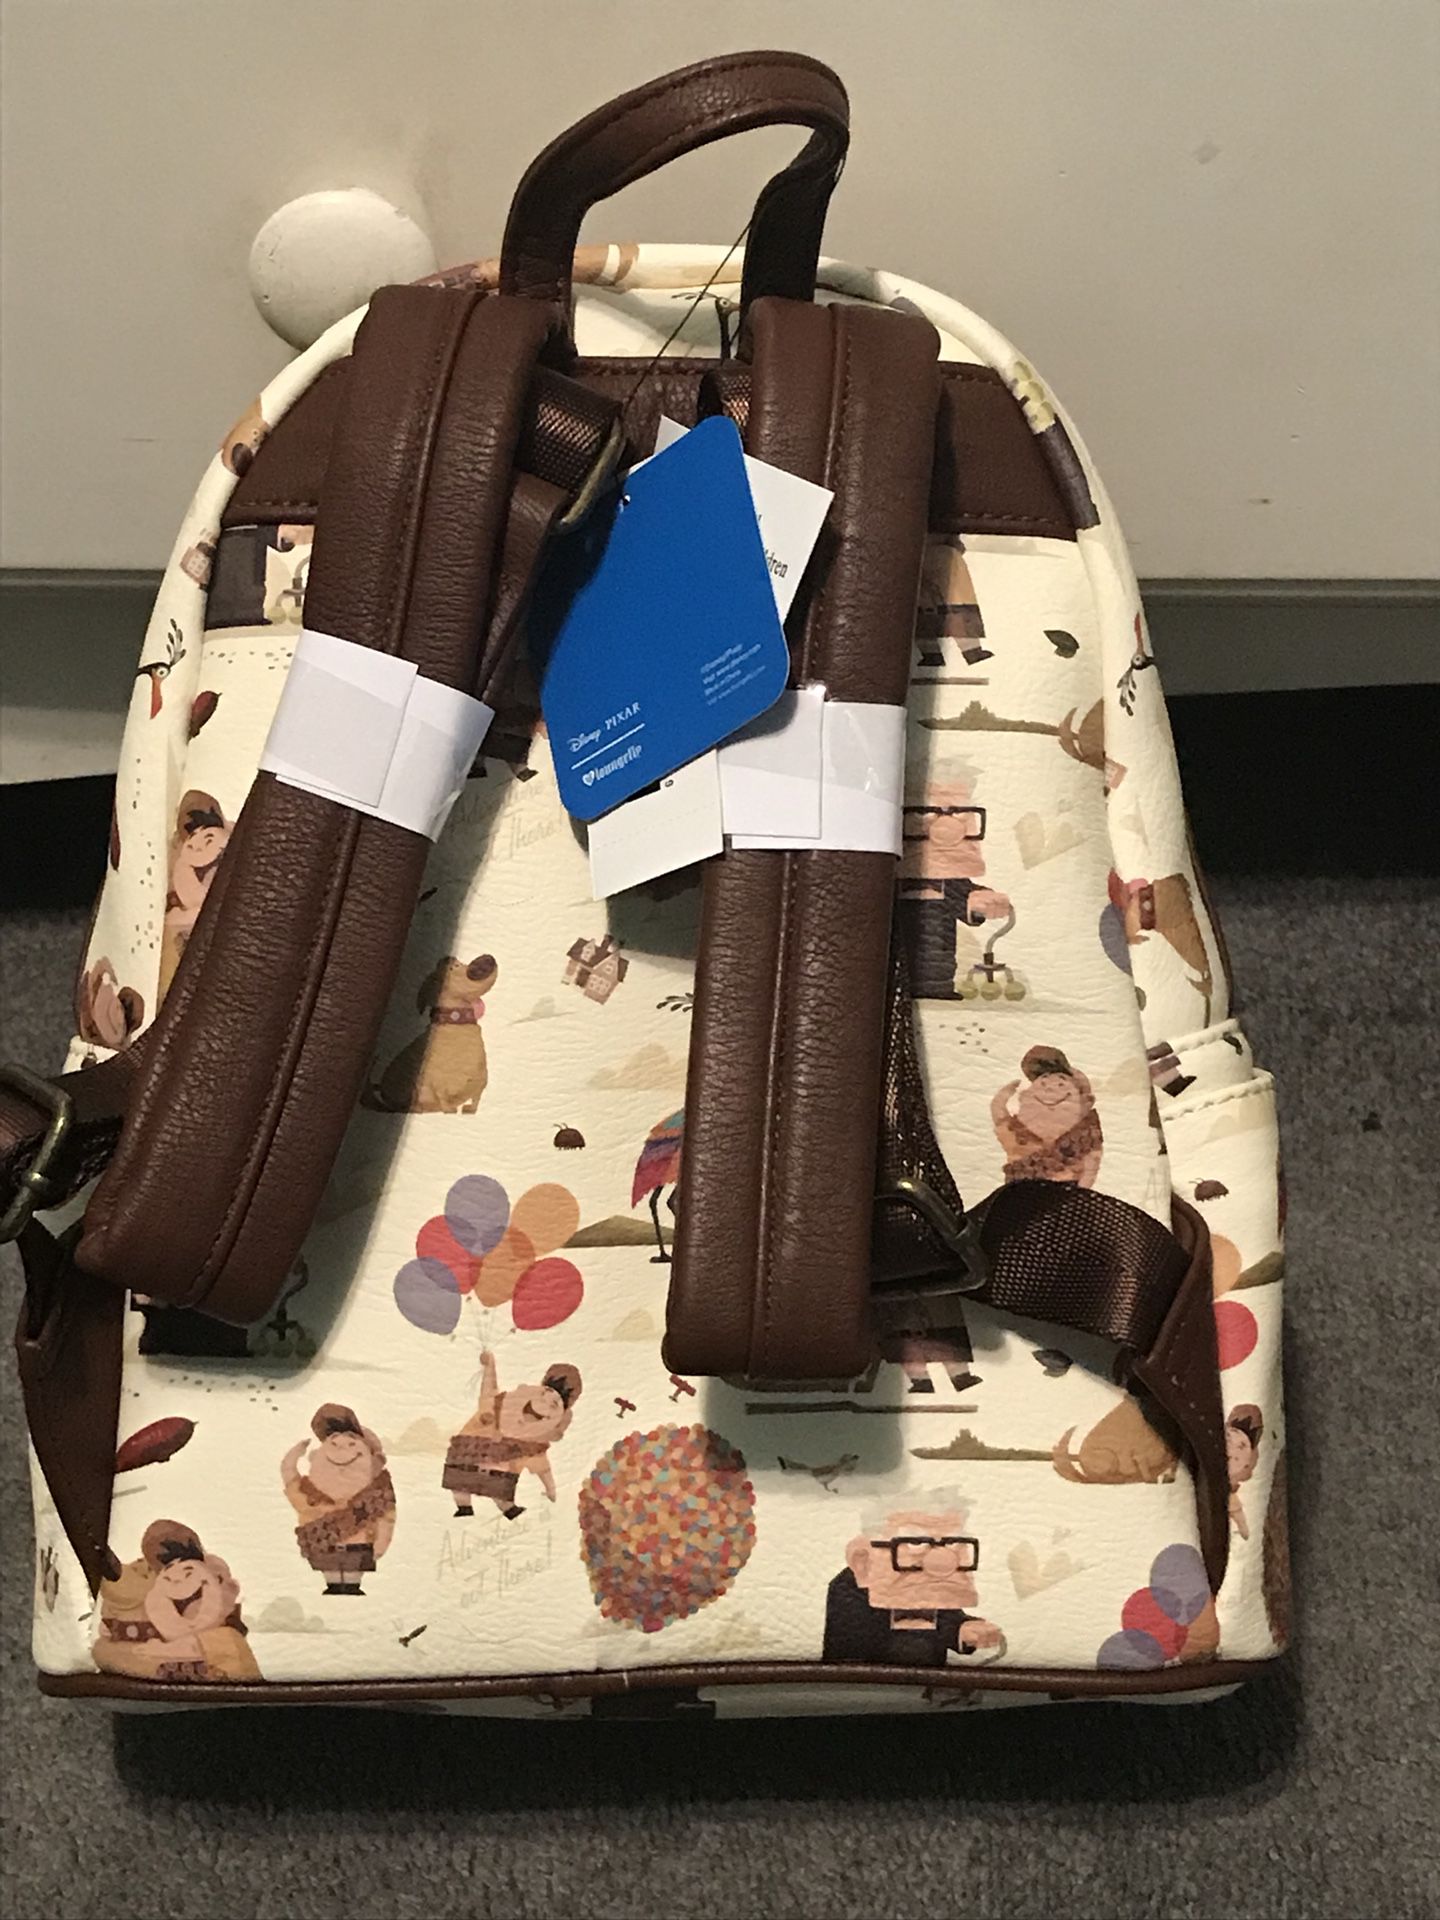 Loungefly Sleeping Beauty Purse for Sale in Chino, CA - OfferUp